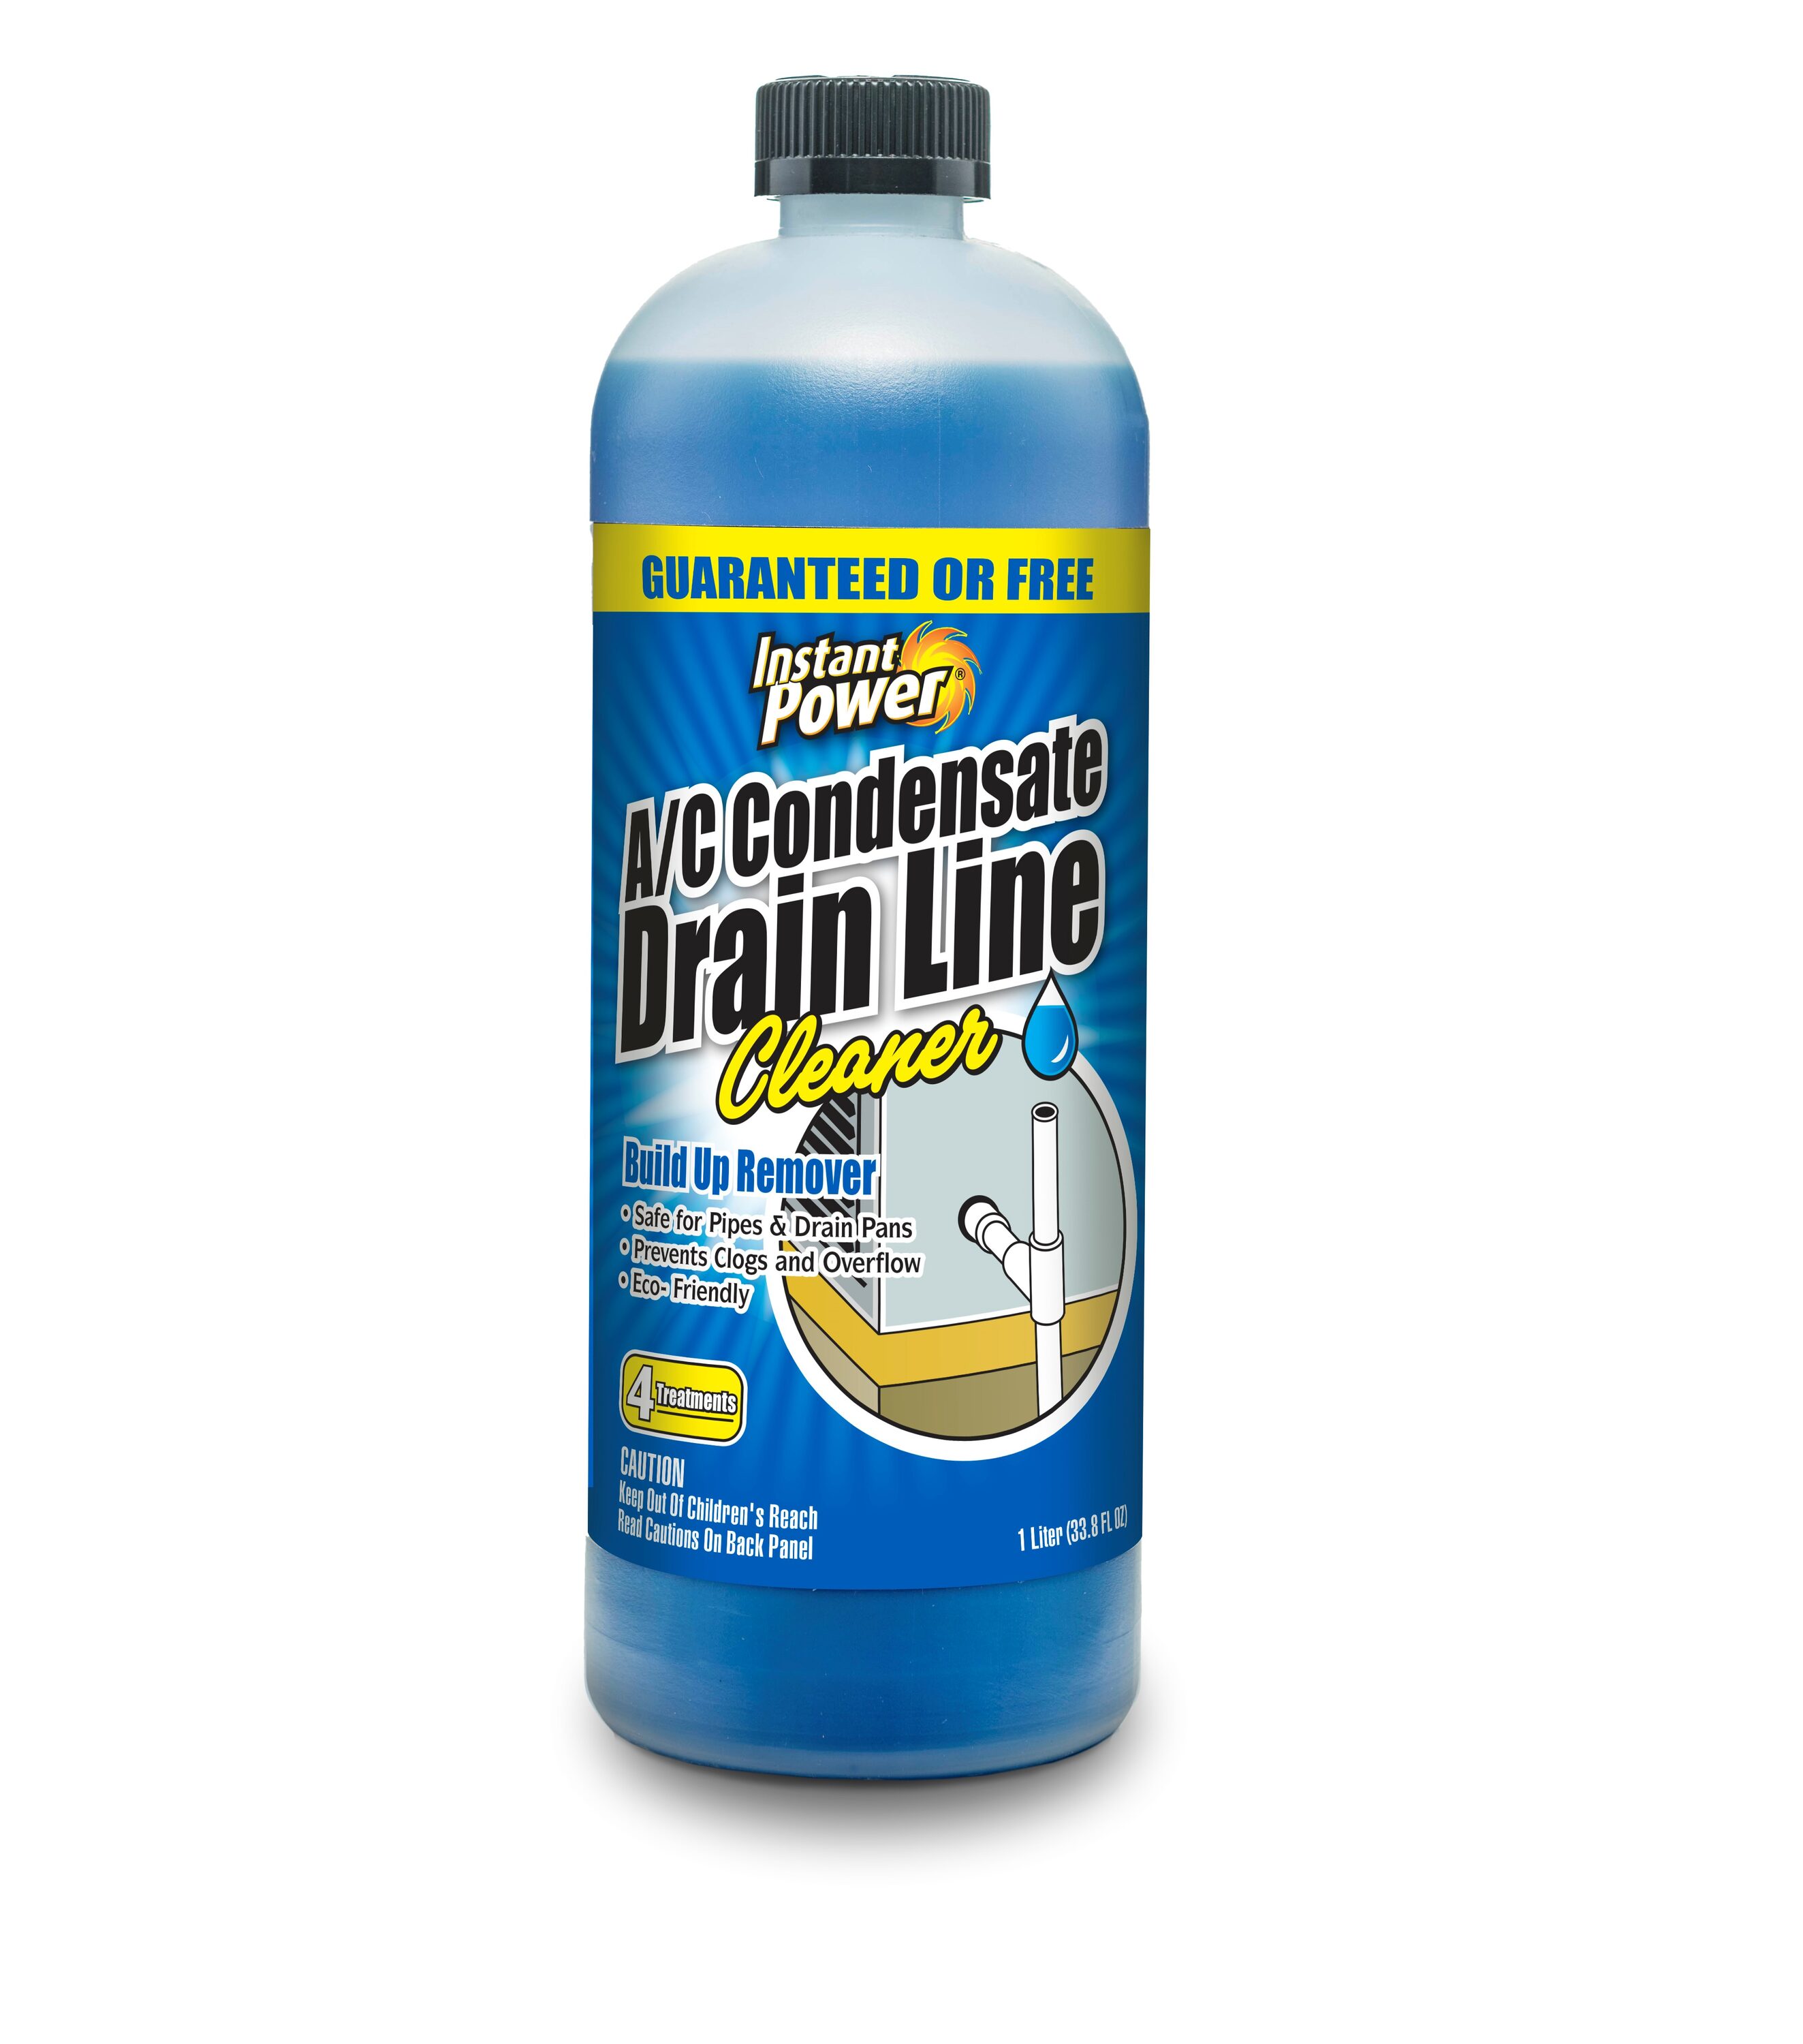 Instant Power Liquid Drain Cleaner for Bathrooms - Clears Main